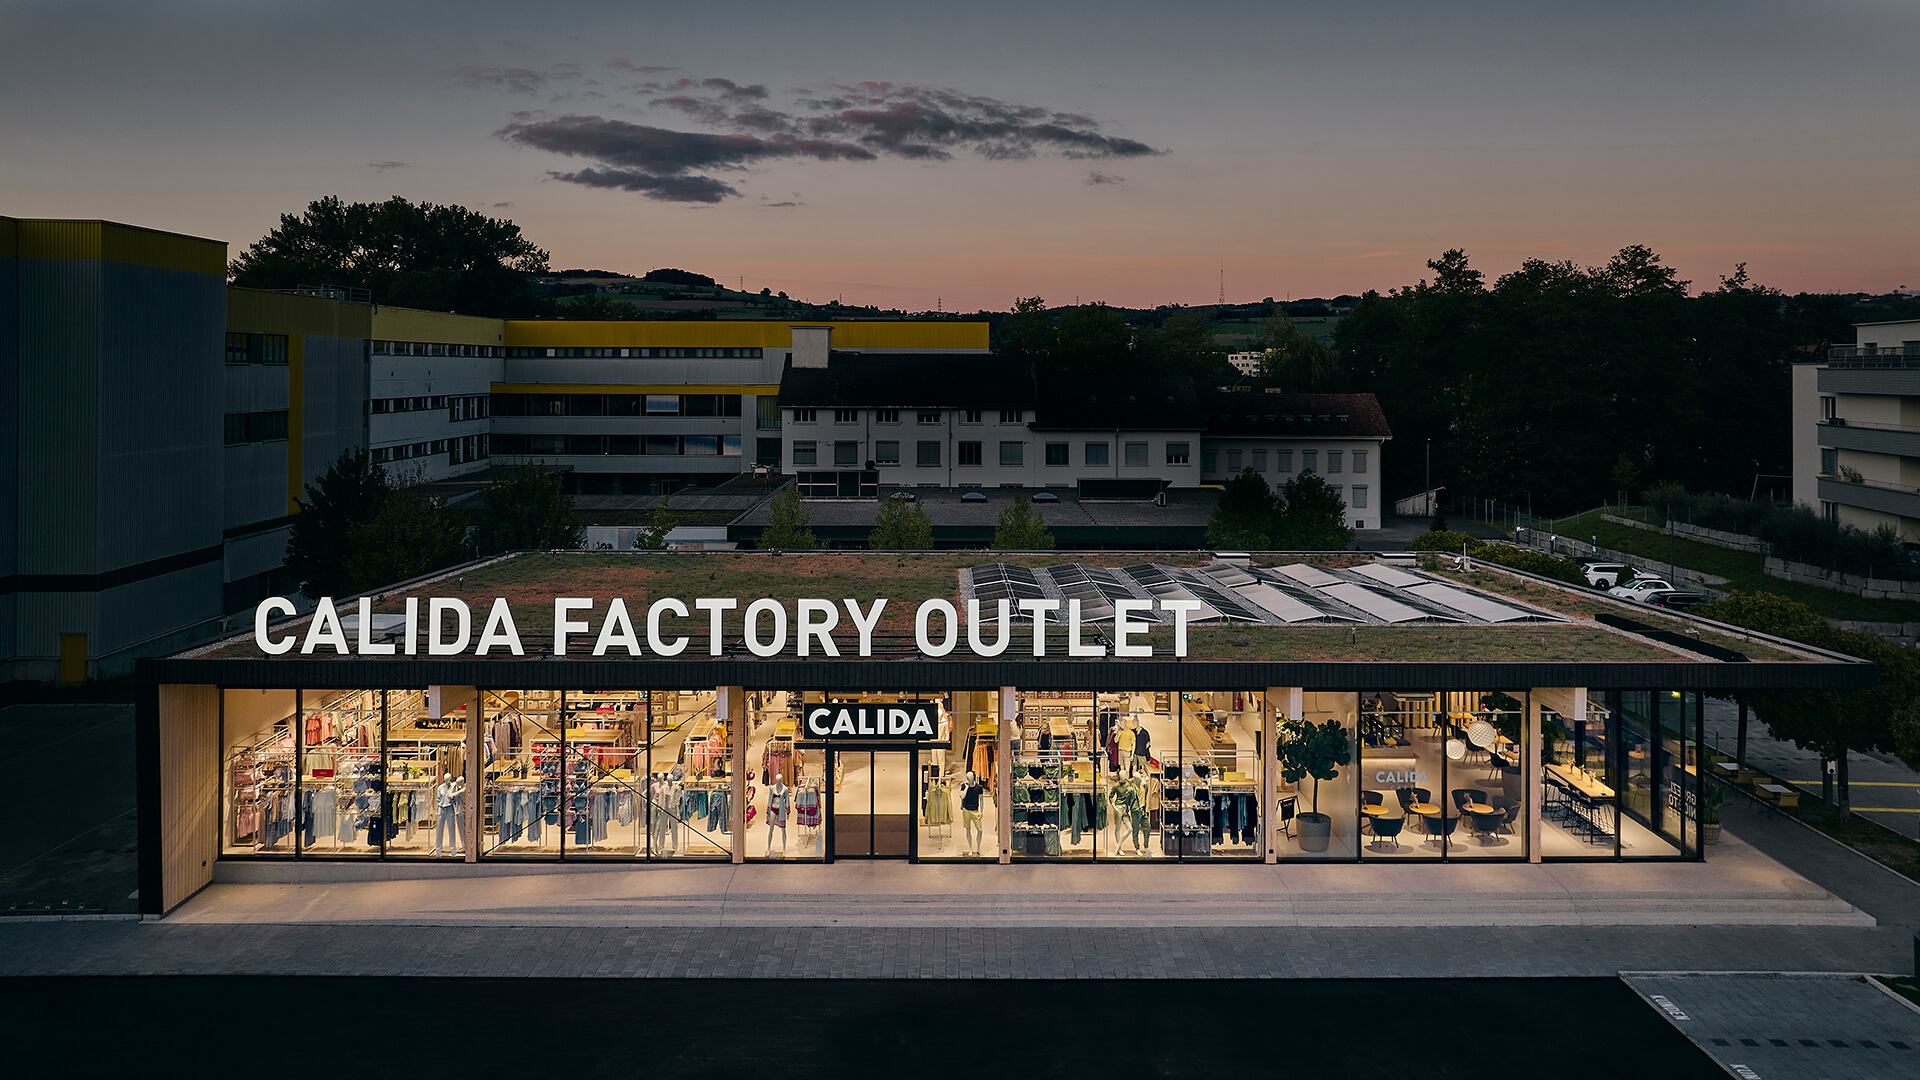 View of the Calida Factory Outlet in Sursee